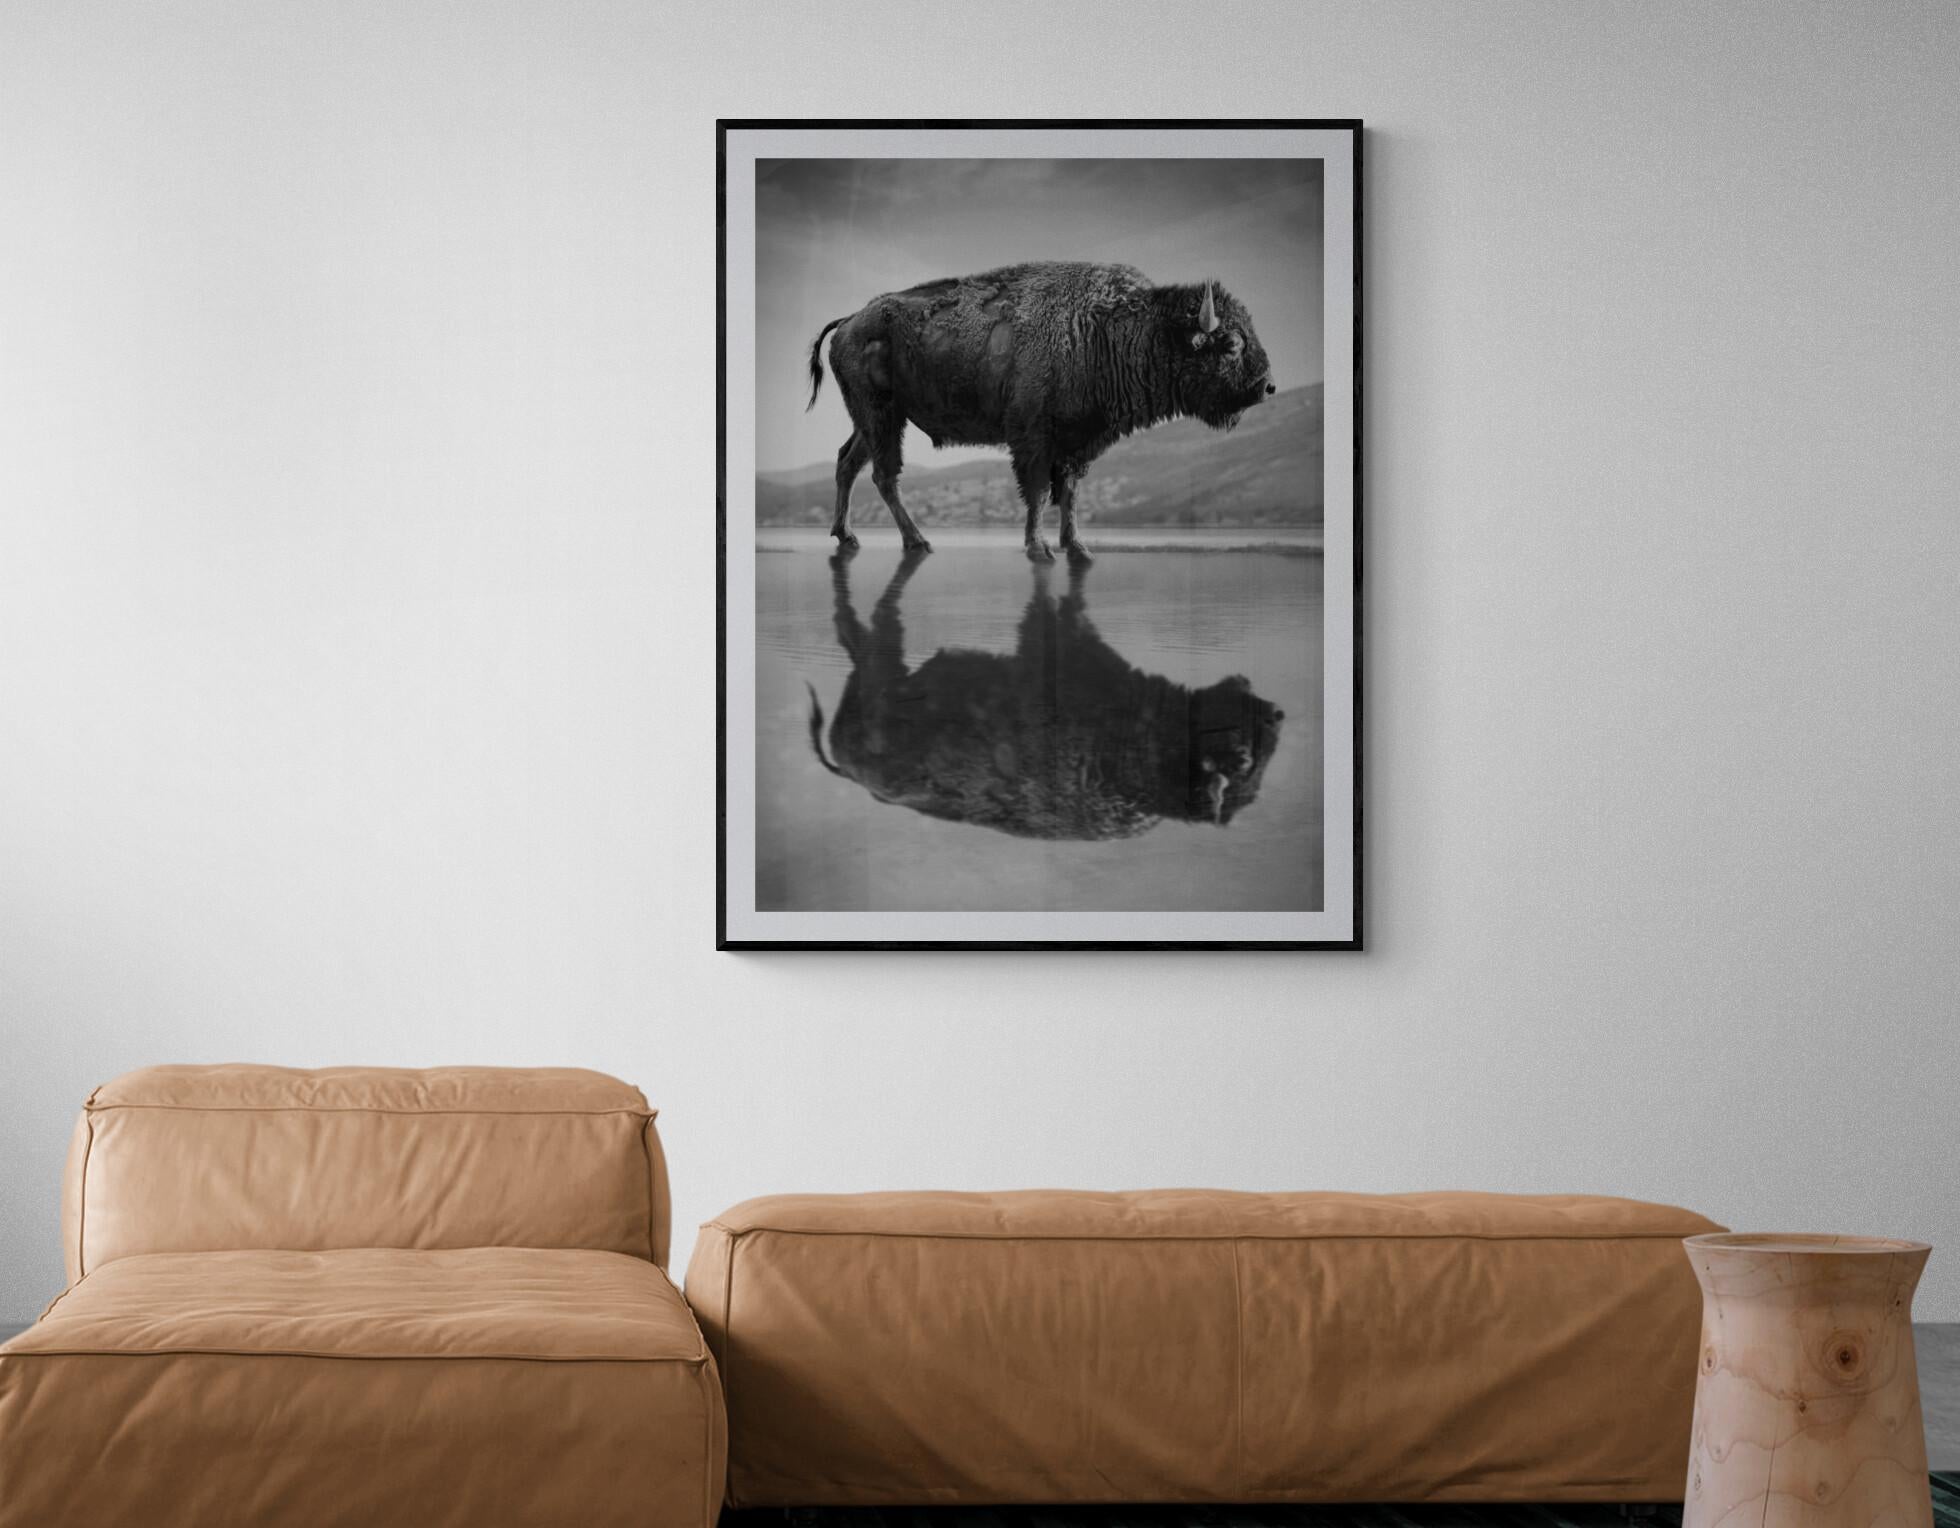 This is a contemporary photograph of an American Bison. 
Printed on archival paper and using archival inks
Framing available. Inquire for rates. 

This print is a signed A/P (Artist Proof) 
1 of 4

Shane Russeck has built a reputation for capturing